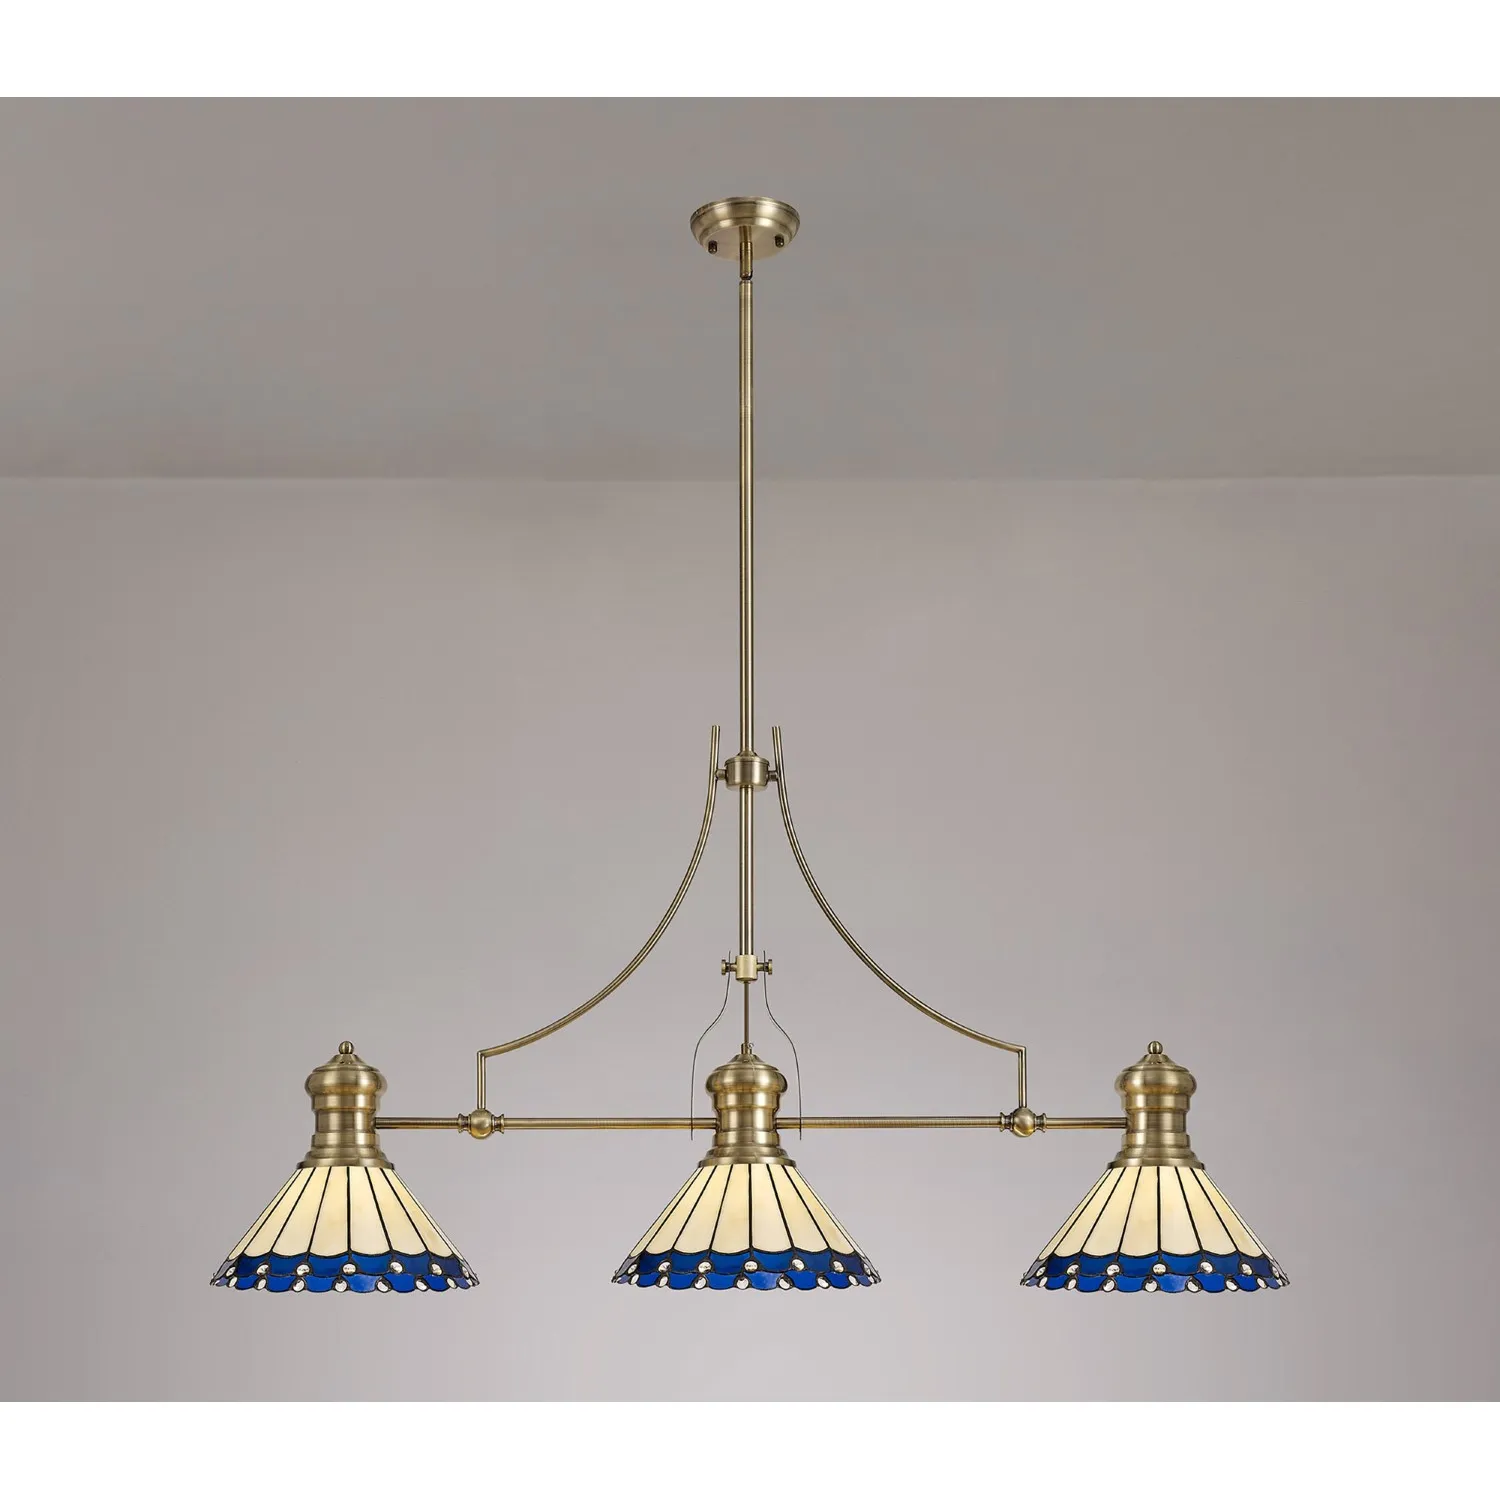 Ware 3 Light Linear Pendant E27 With 30cm Tiffany Shade, Antique Brass, Blue, Cream, Crystal